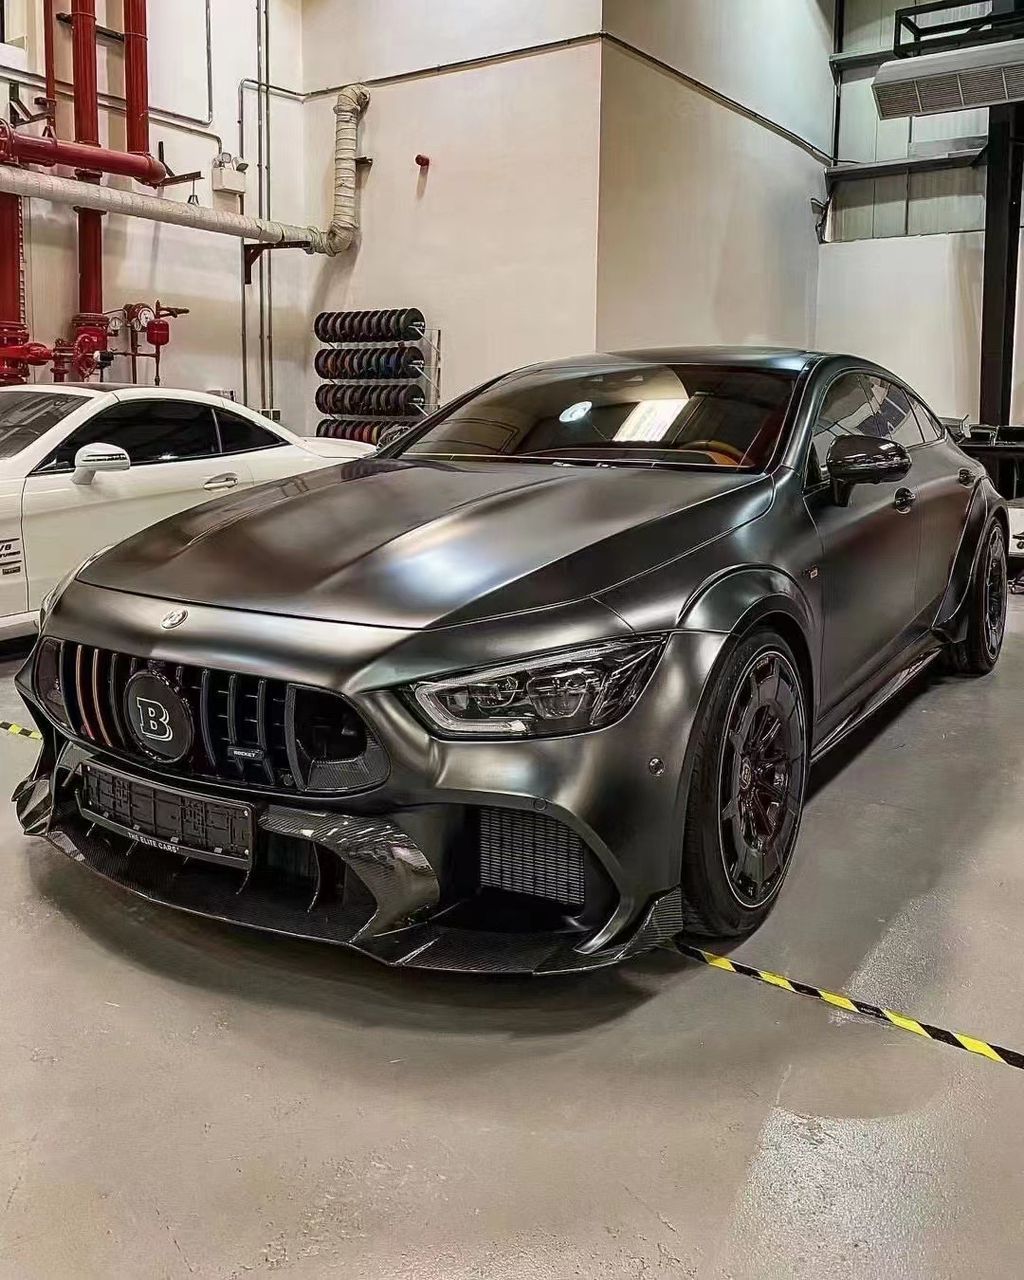 BRABUS 900 Rocket edition body kit with carbon fiber for Mercedes-Benz GT 4 door Coupe